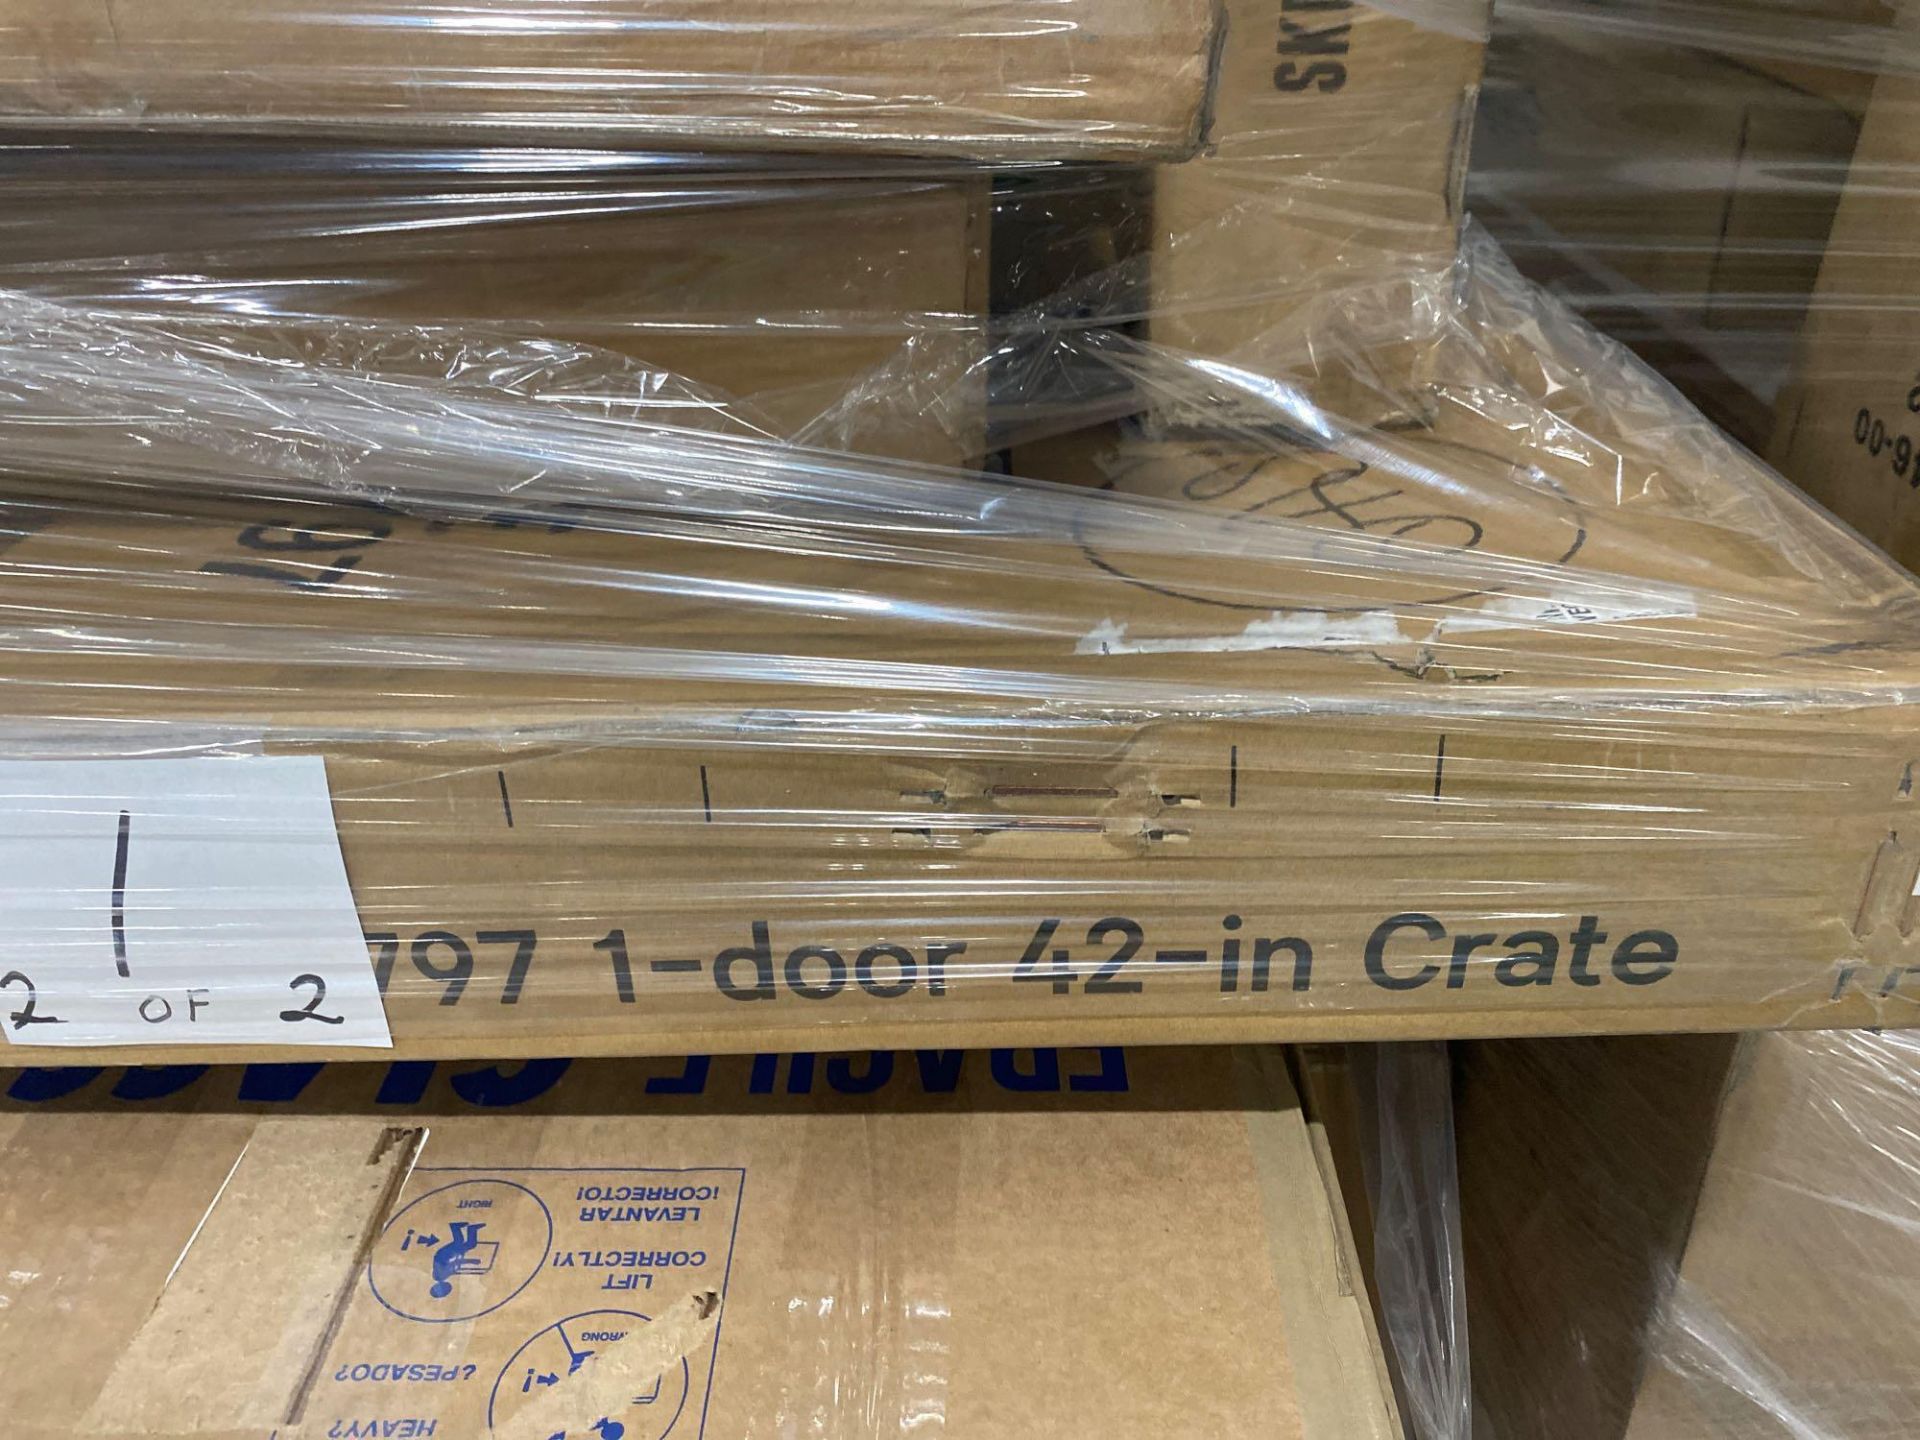 Two Pallets - Image 11 of 16